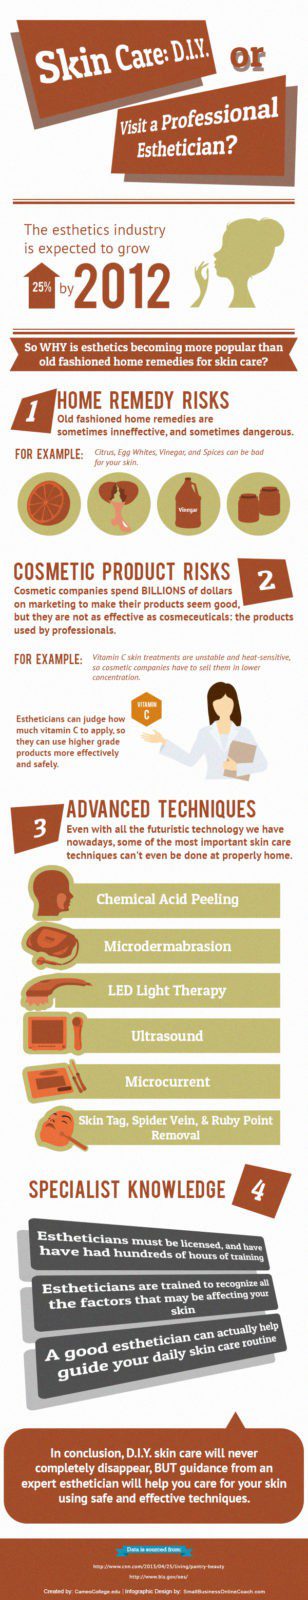 Skin Care: DIY or Visit A Professional Esthetician? (Infographic image)